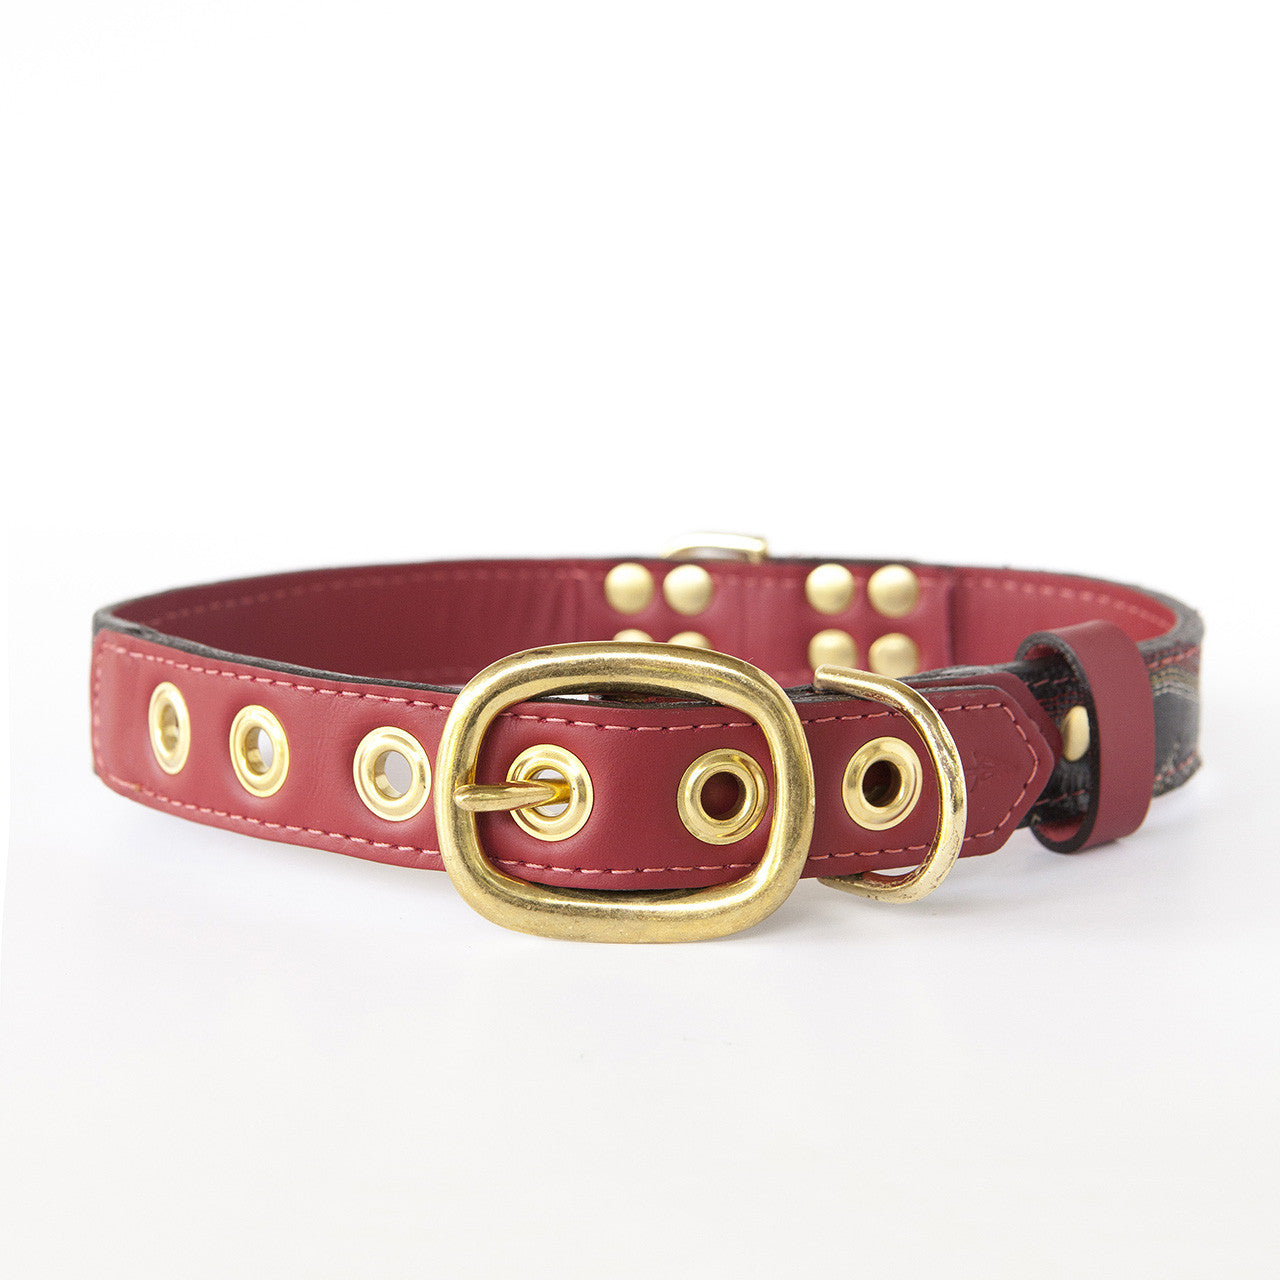 Ruby Red Dog Collar with Black Leather + Multicolored Stitching (back view)